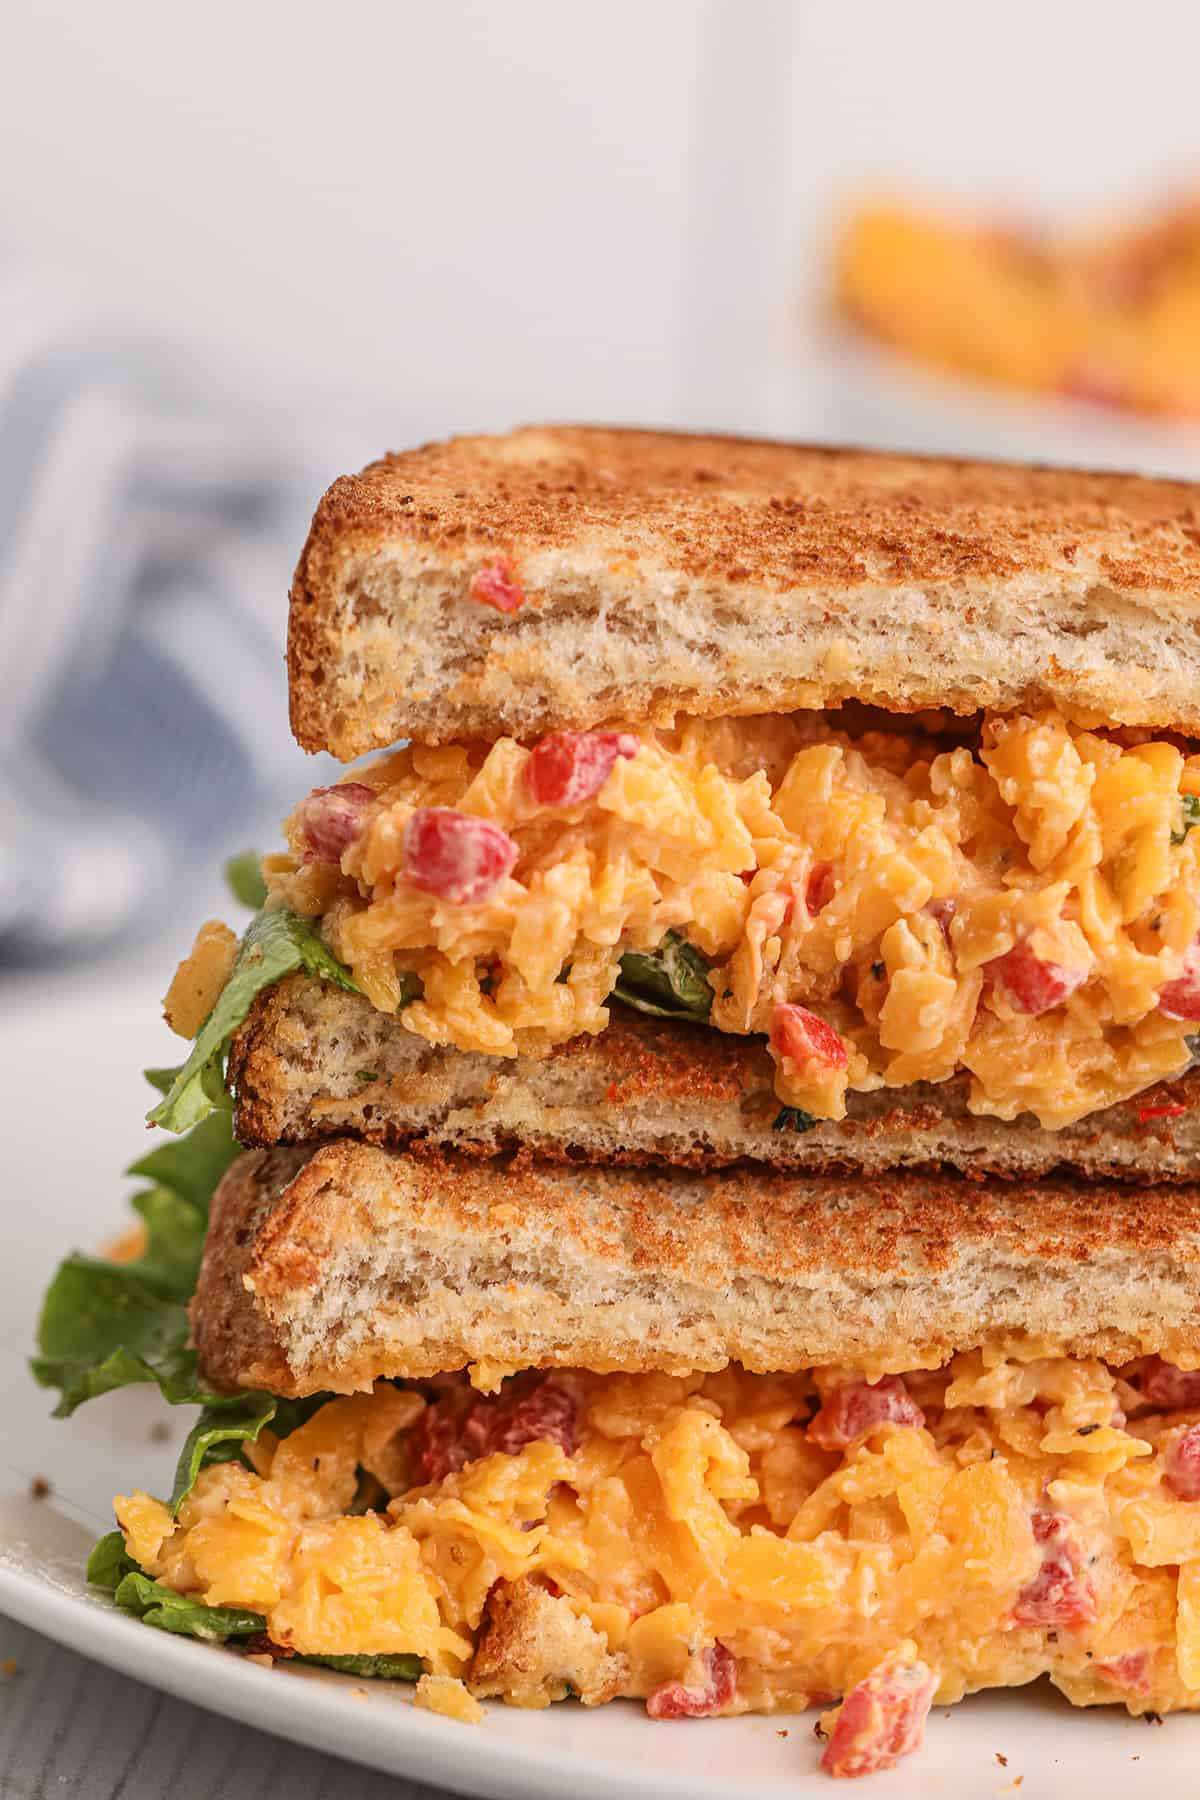 Closeup view of pimiento cheese sandwich.